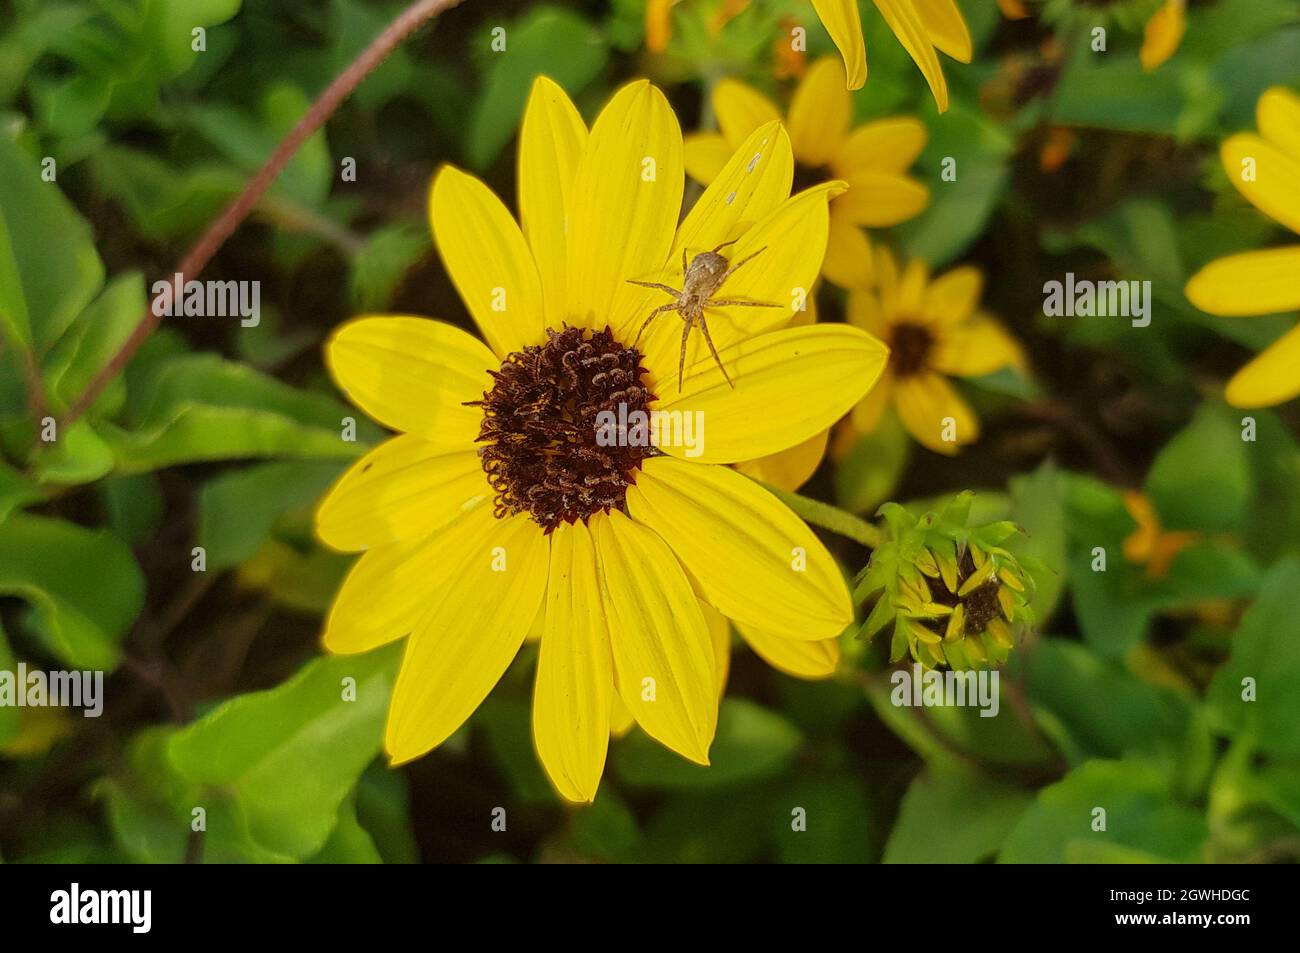 yellow flower with a small spider on a petal in the open air Stock Photo